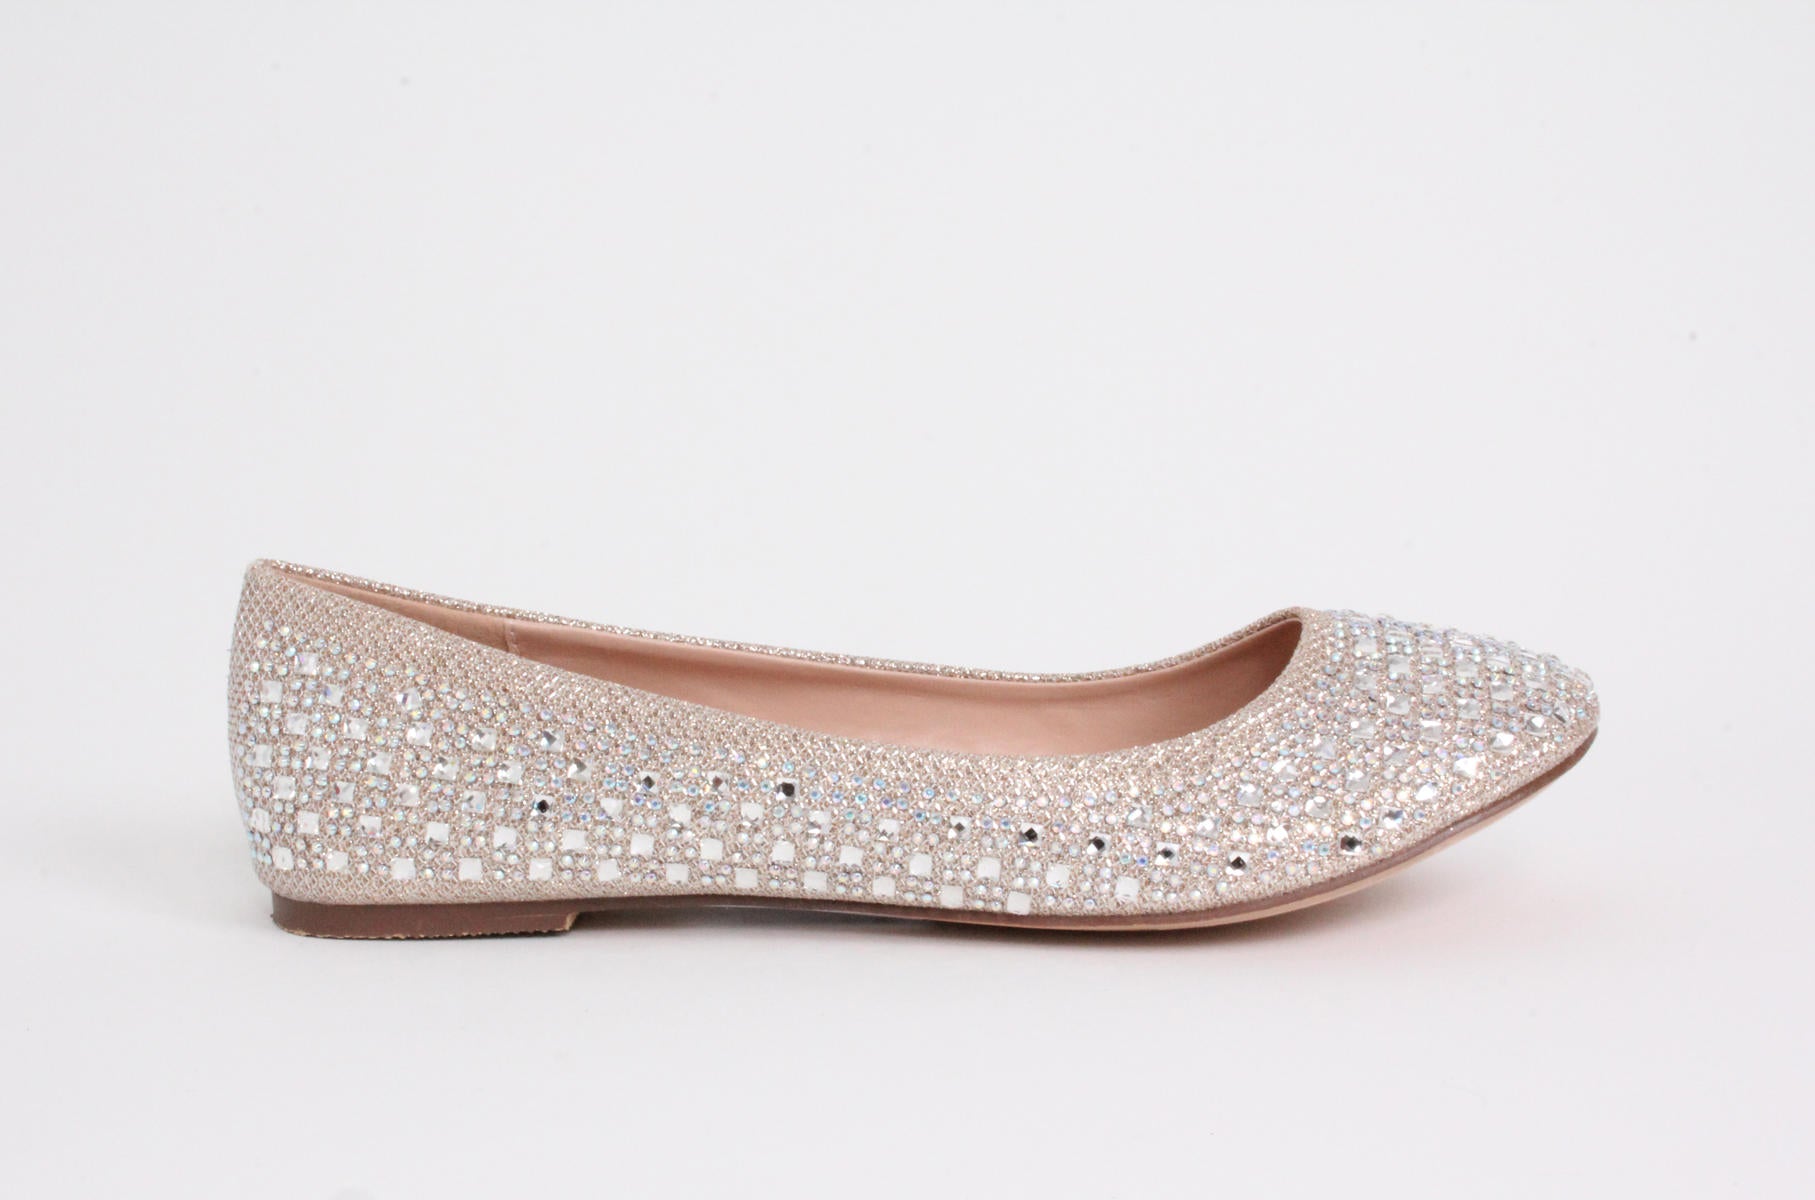 Your Party Shoes Hannah Crystal Embellished Ballet Flat Prom Pageant F ...